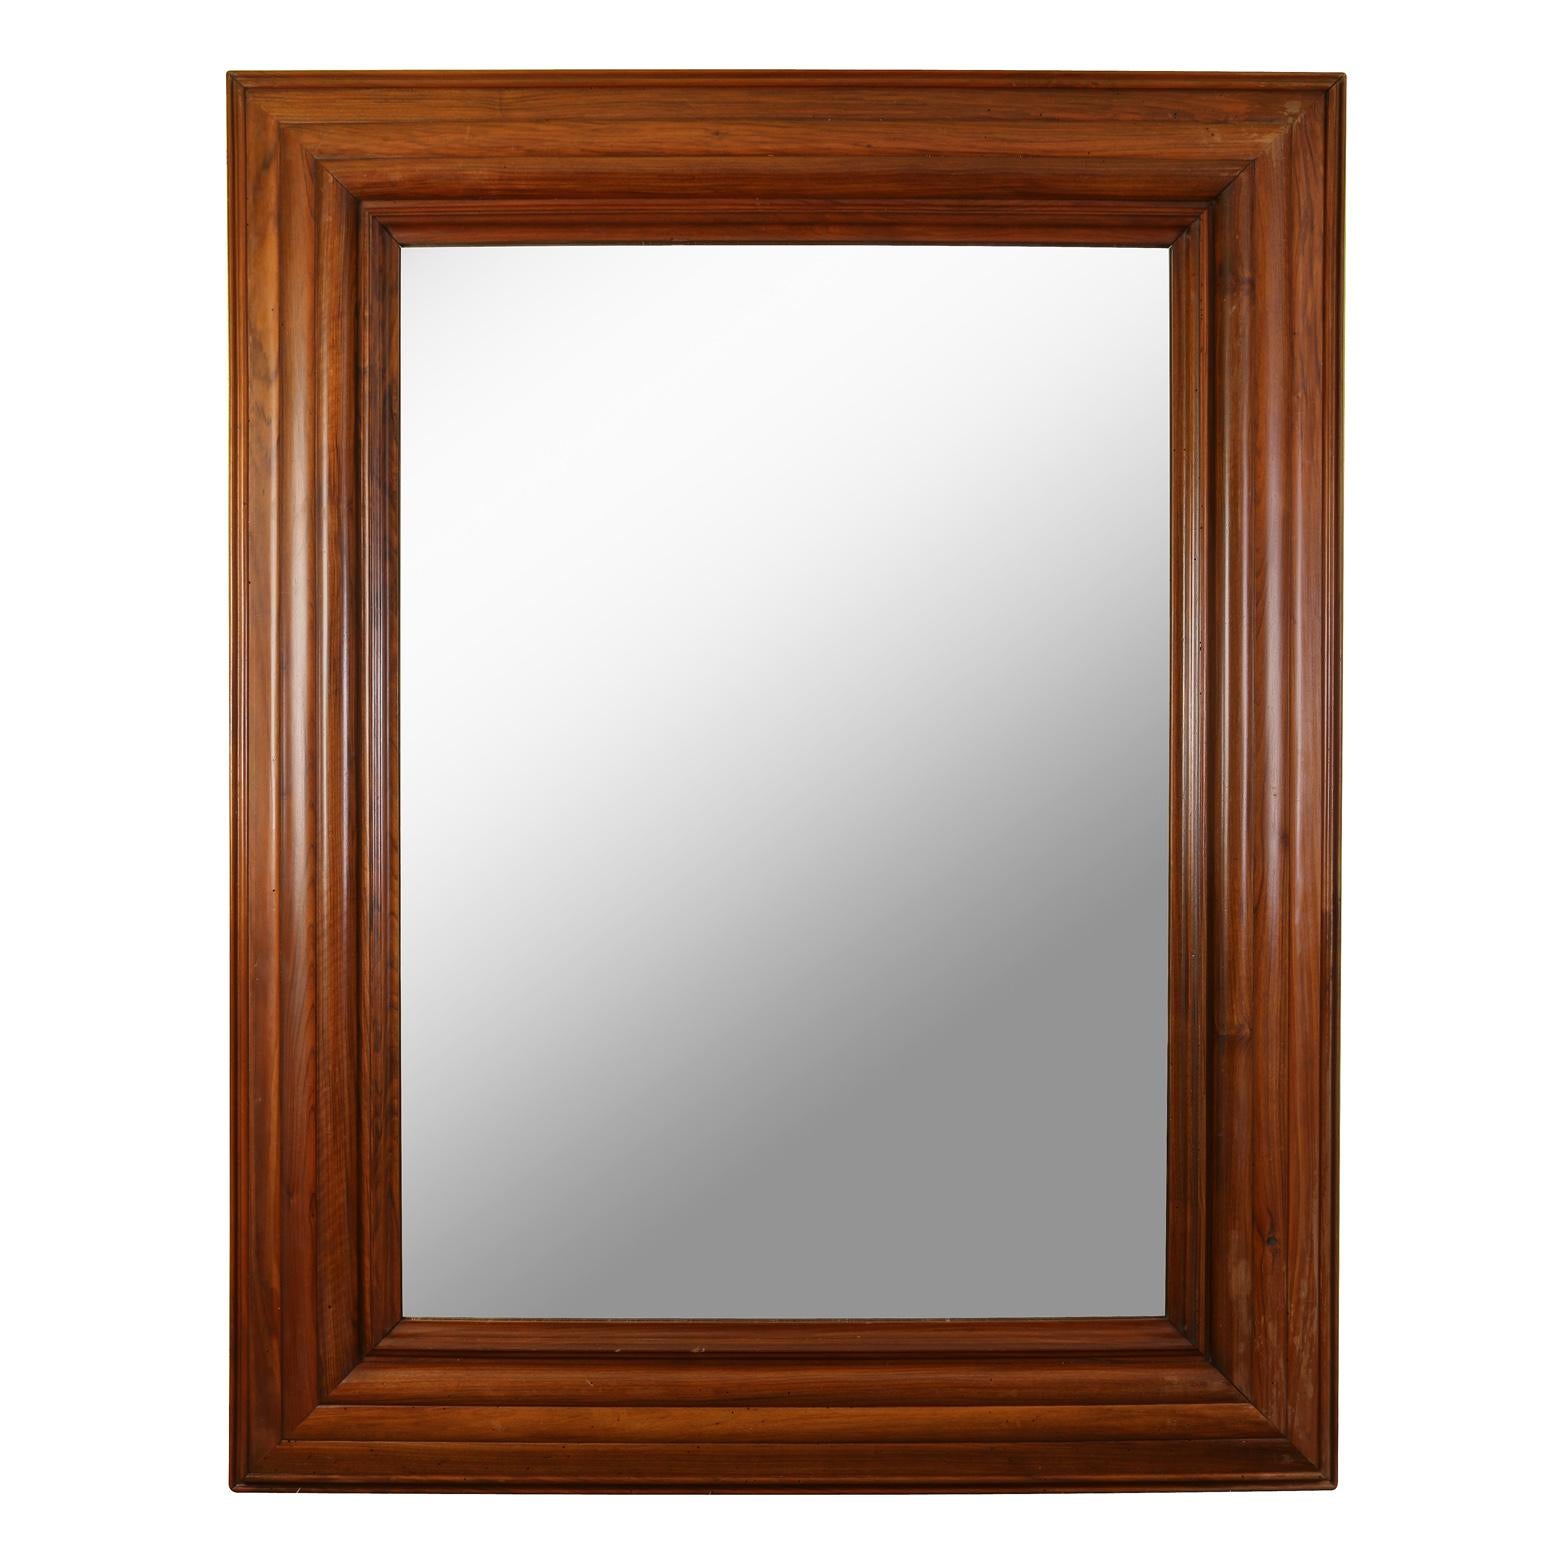 What makes this mirror a standout is its large scale and its rich mahogany frame.  With its lovely molded frame, the mirror is a statement piece in any space.